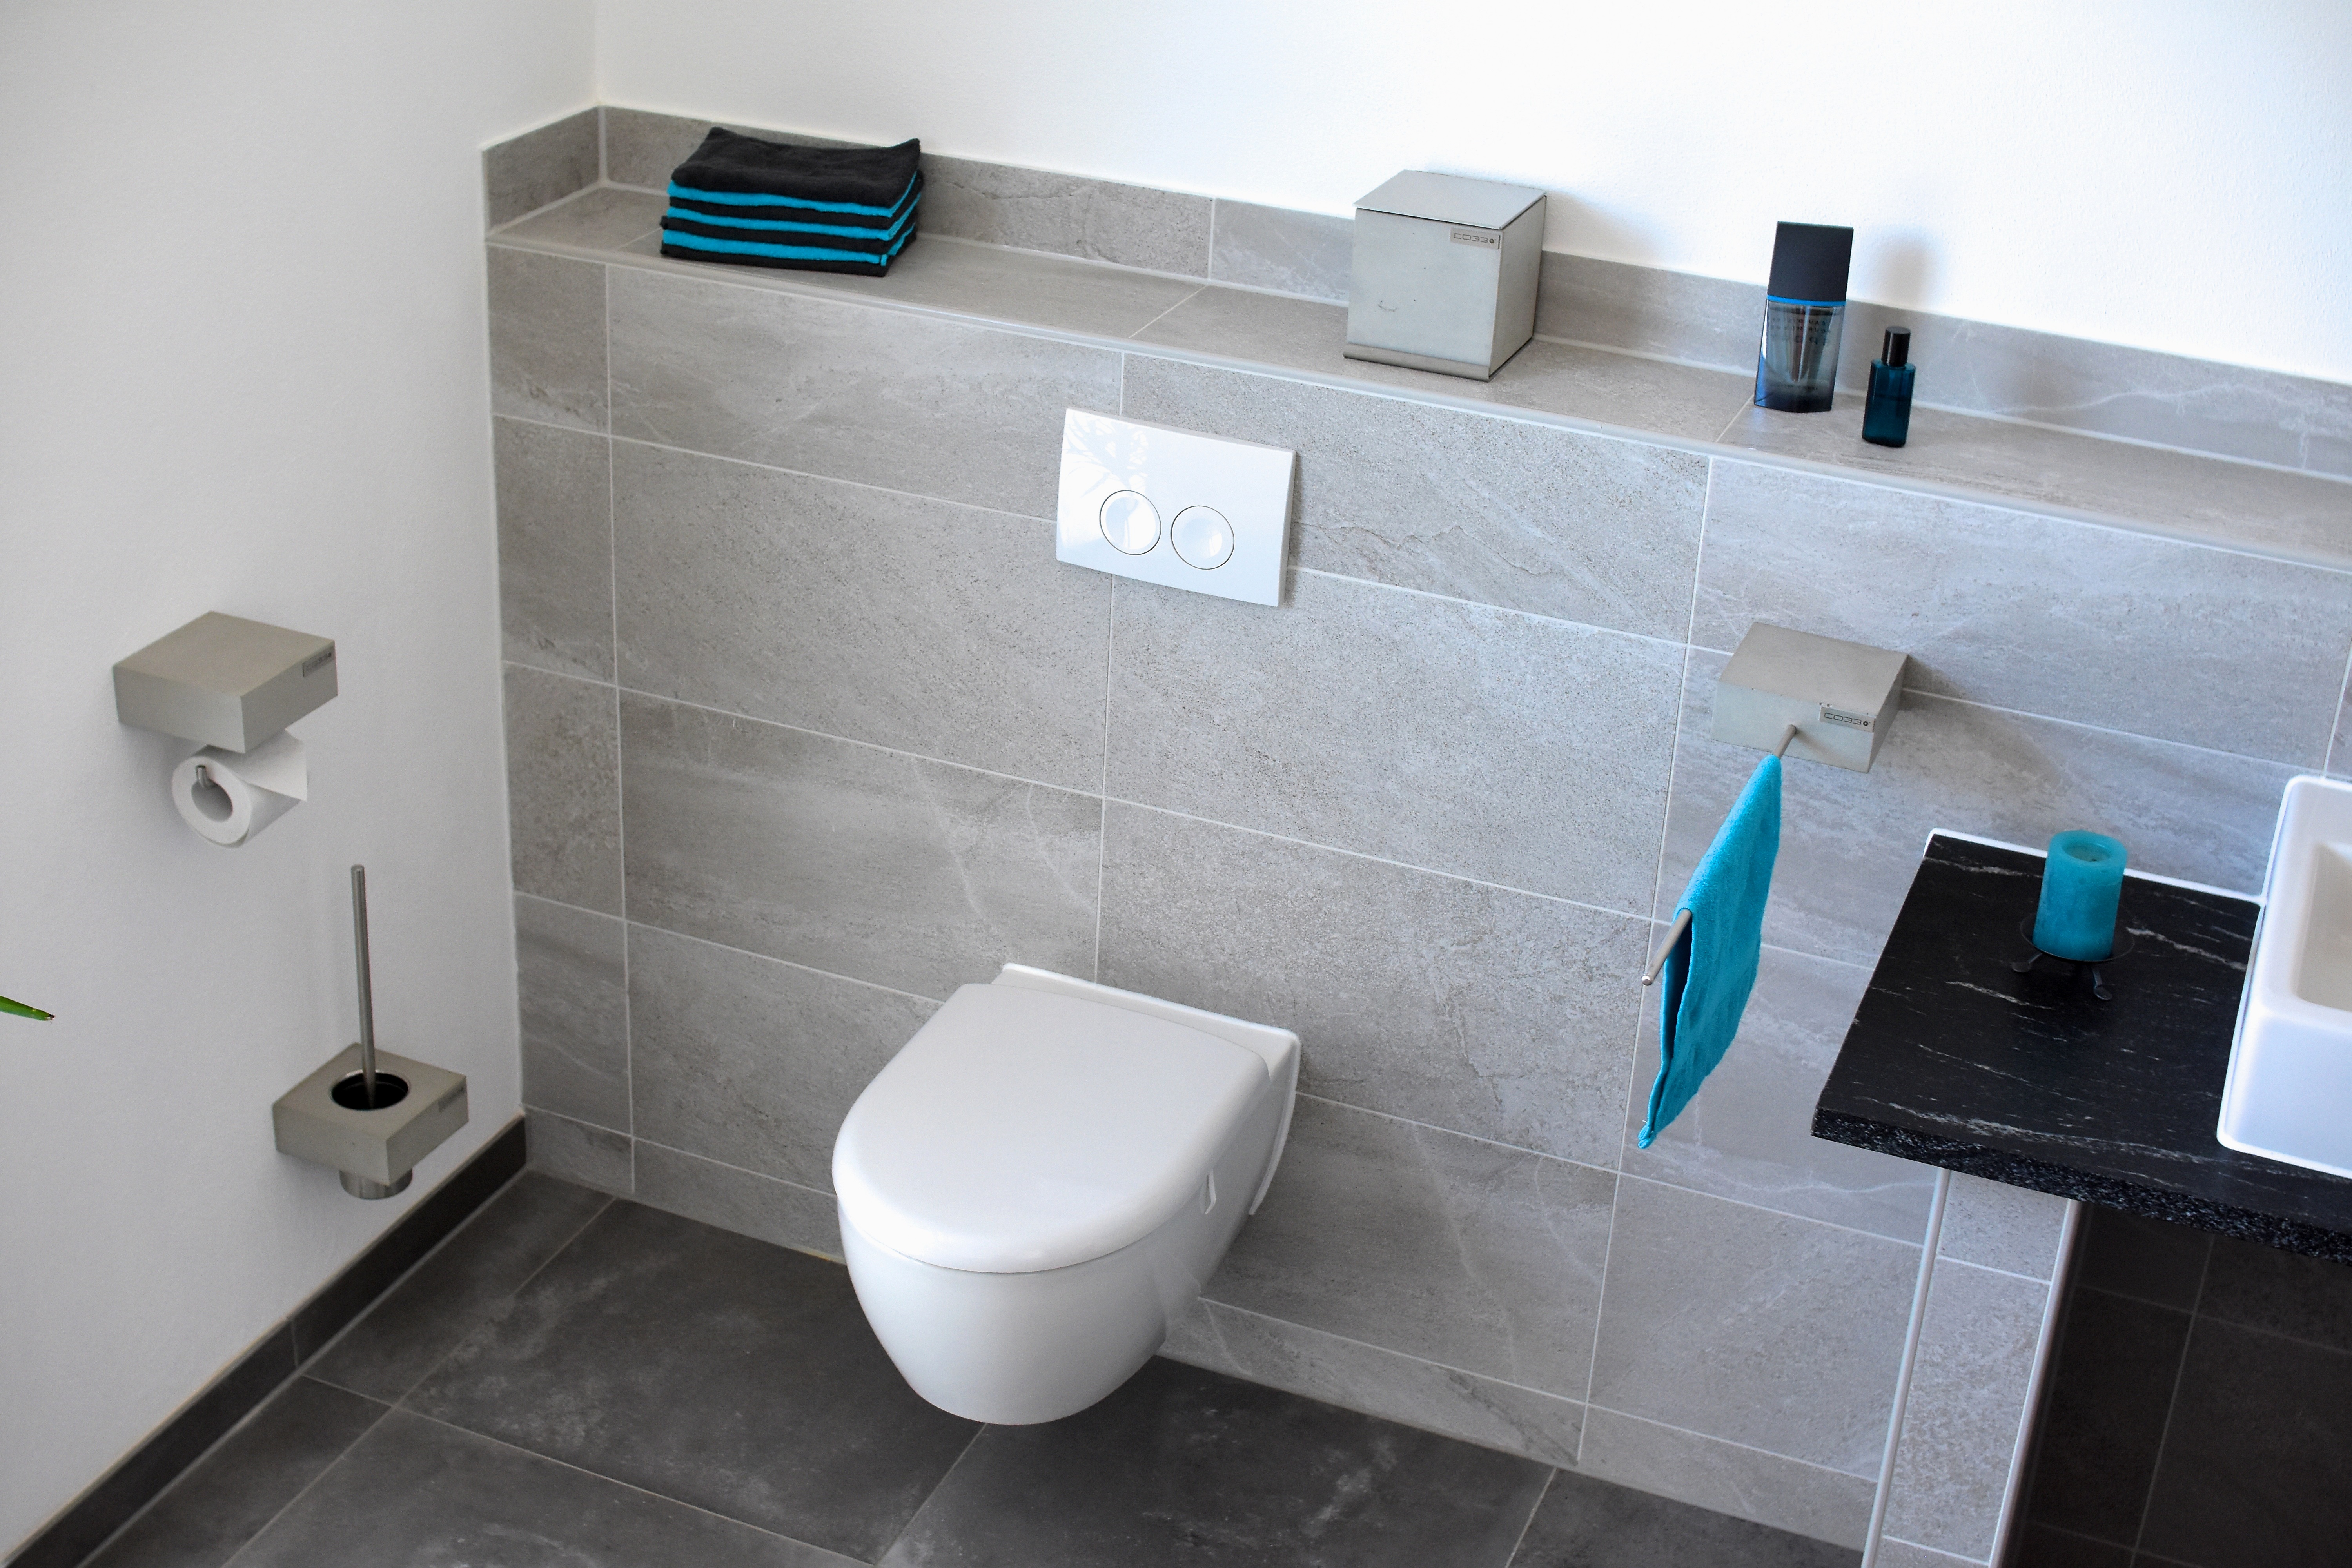 BALNEOS real concrete bathroom fittings and accessories